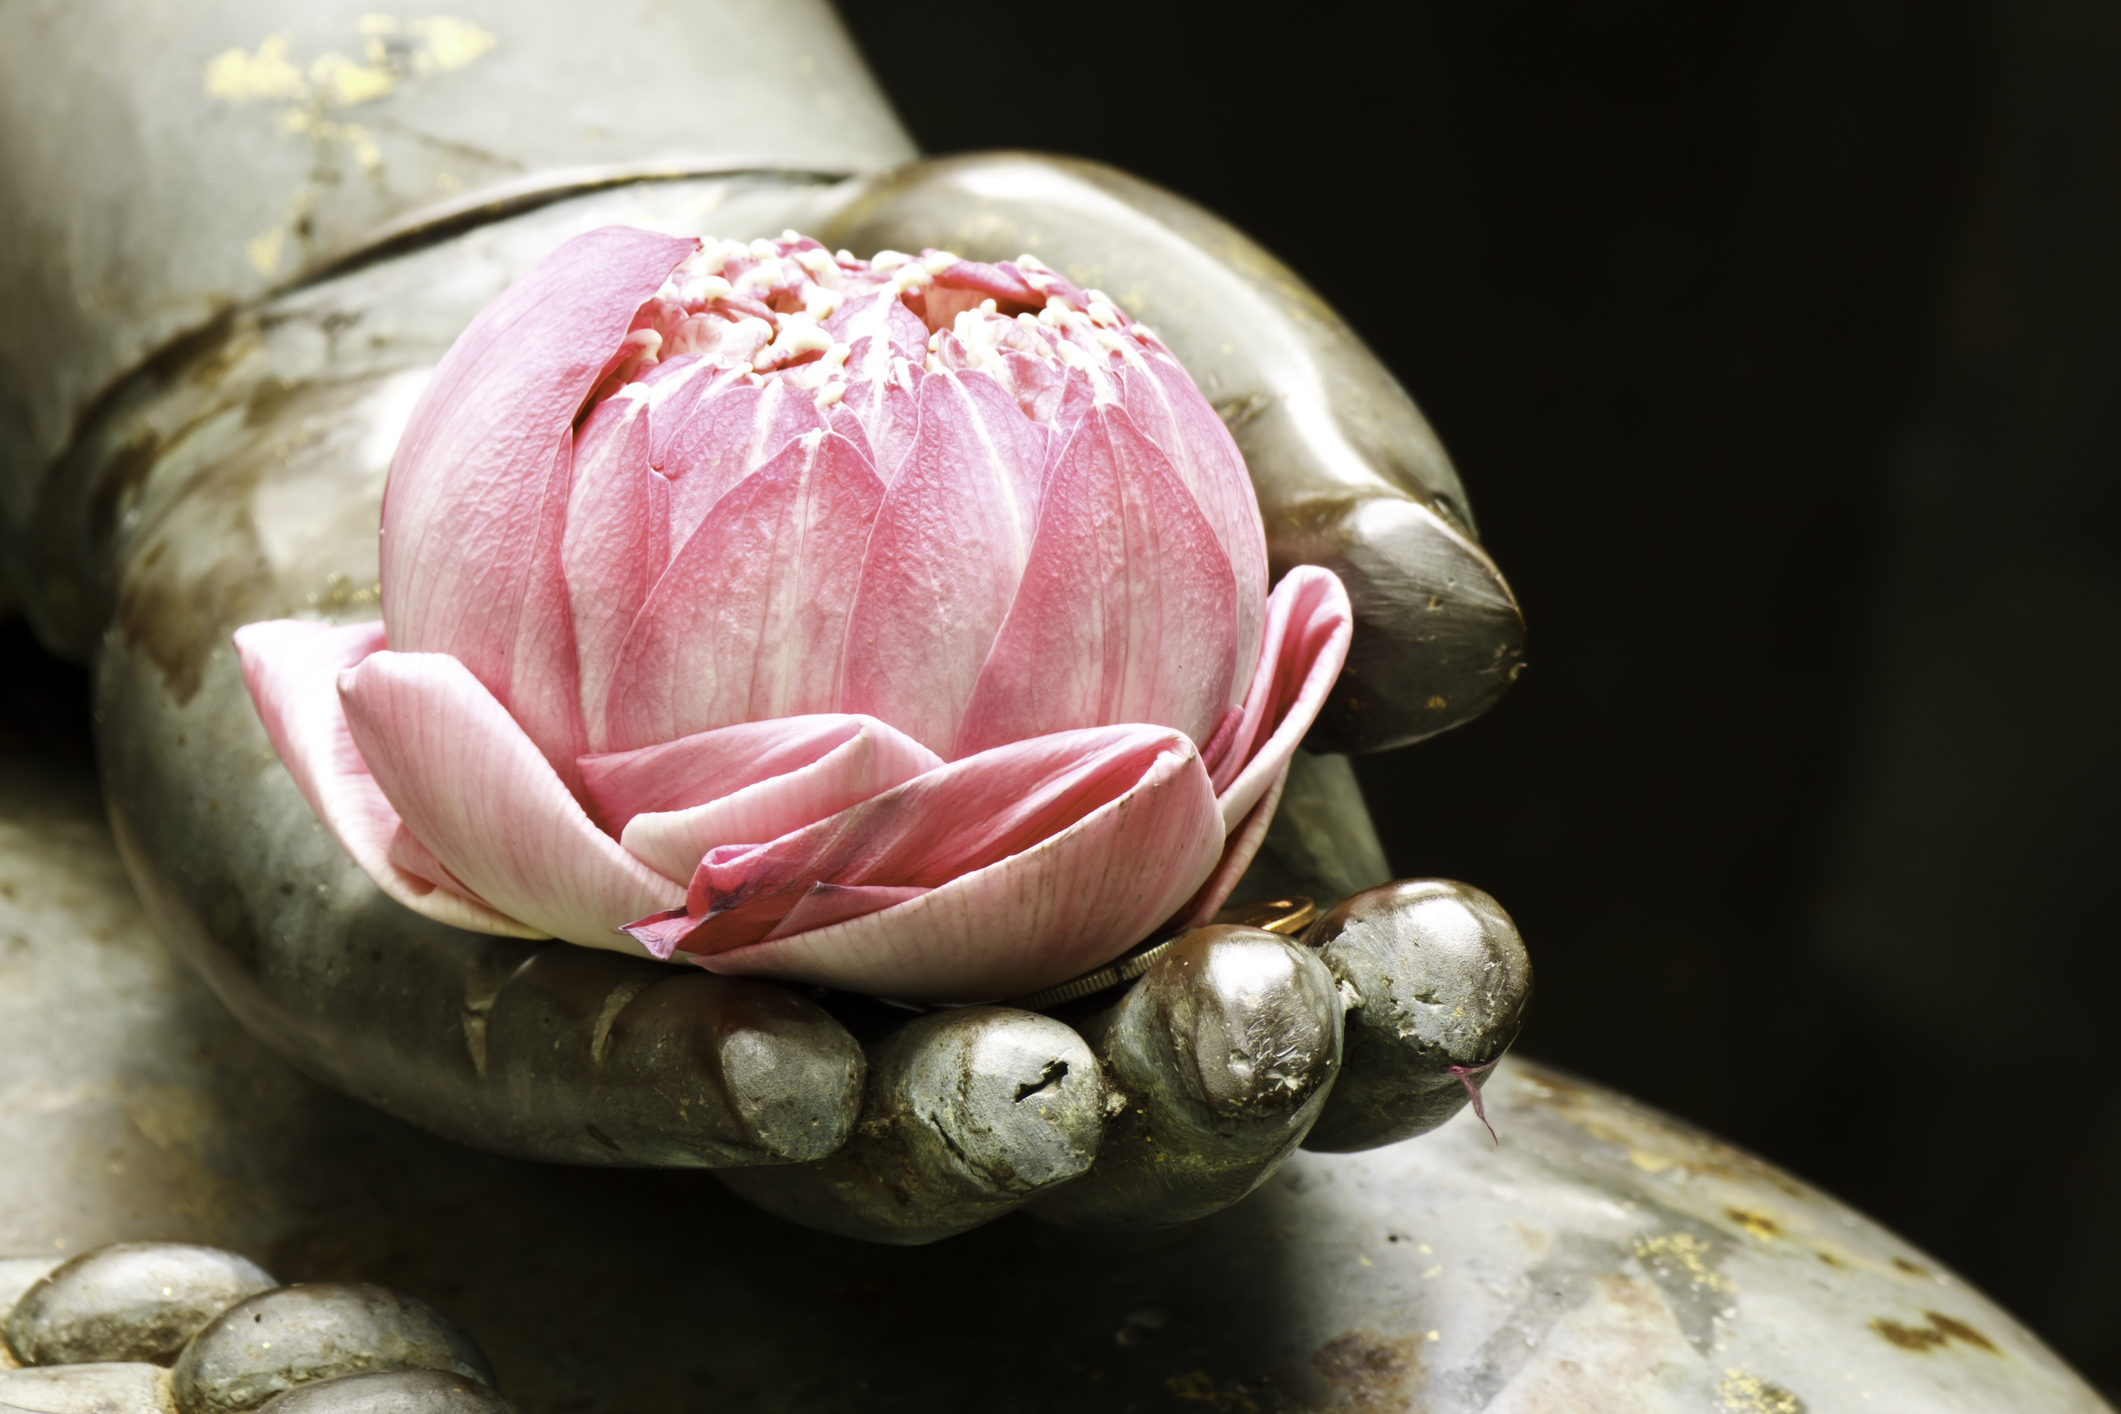 A beautiful pink flower in the hand of a Buddhist statue